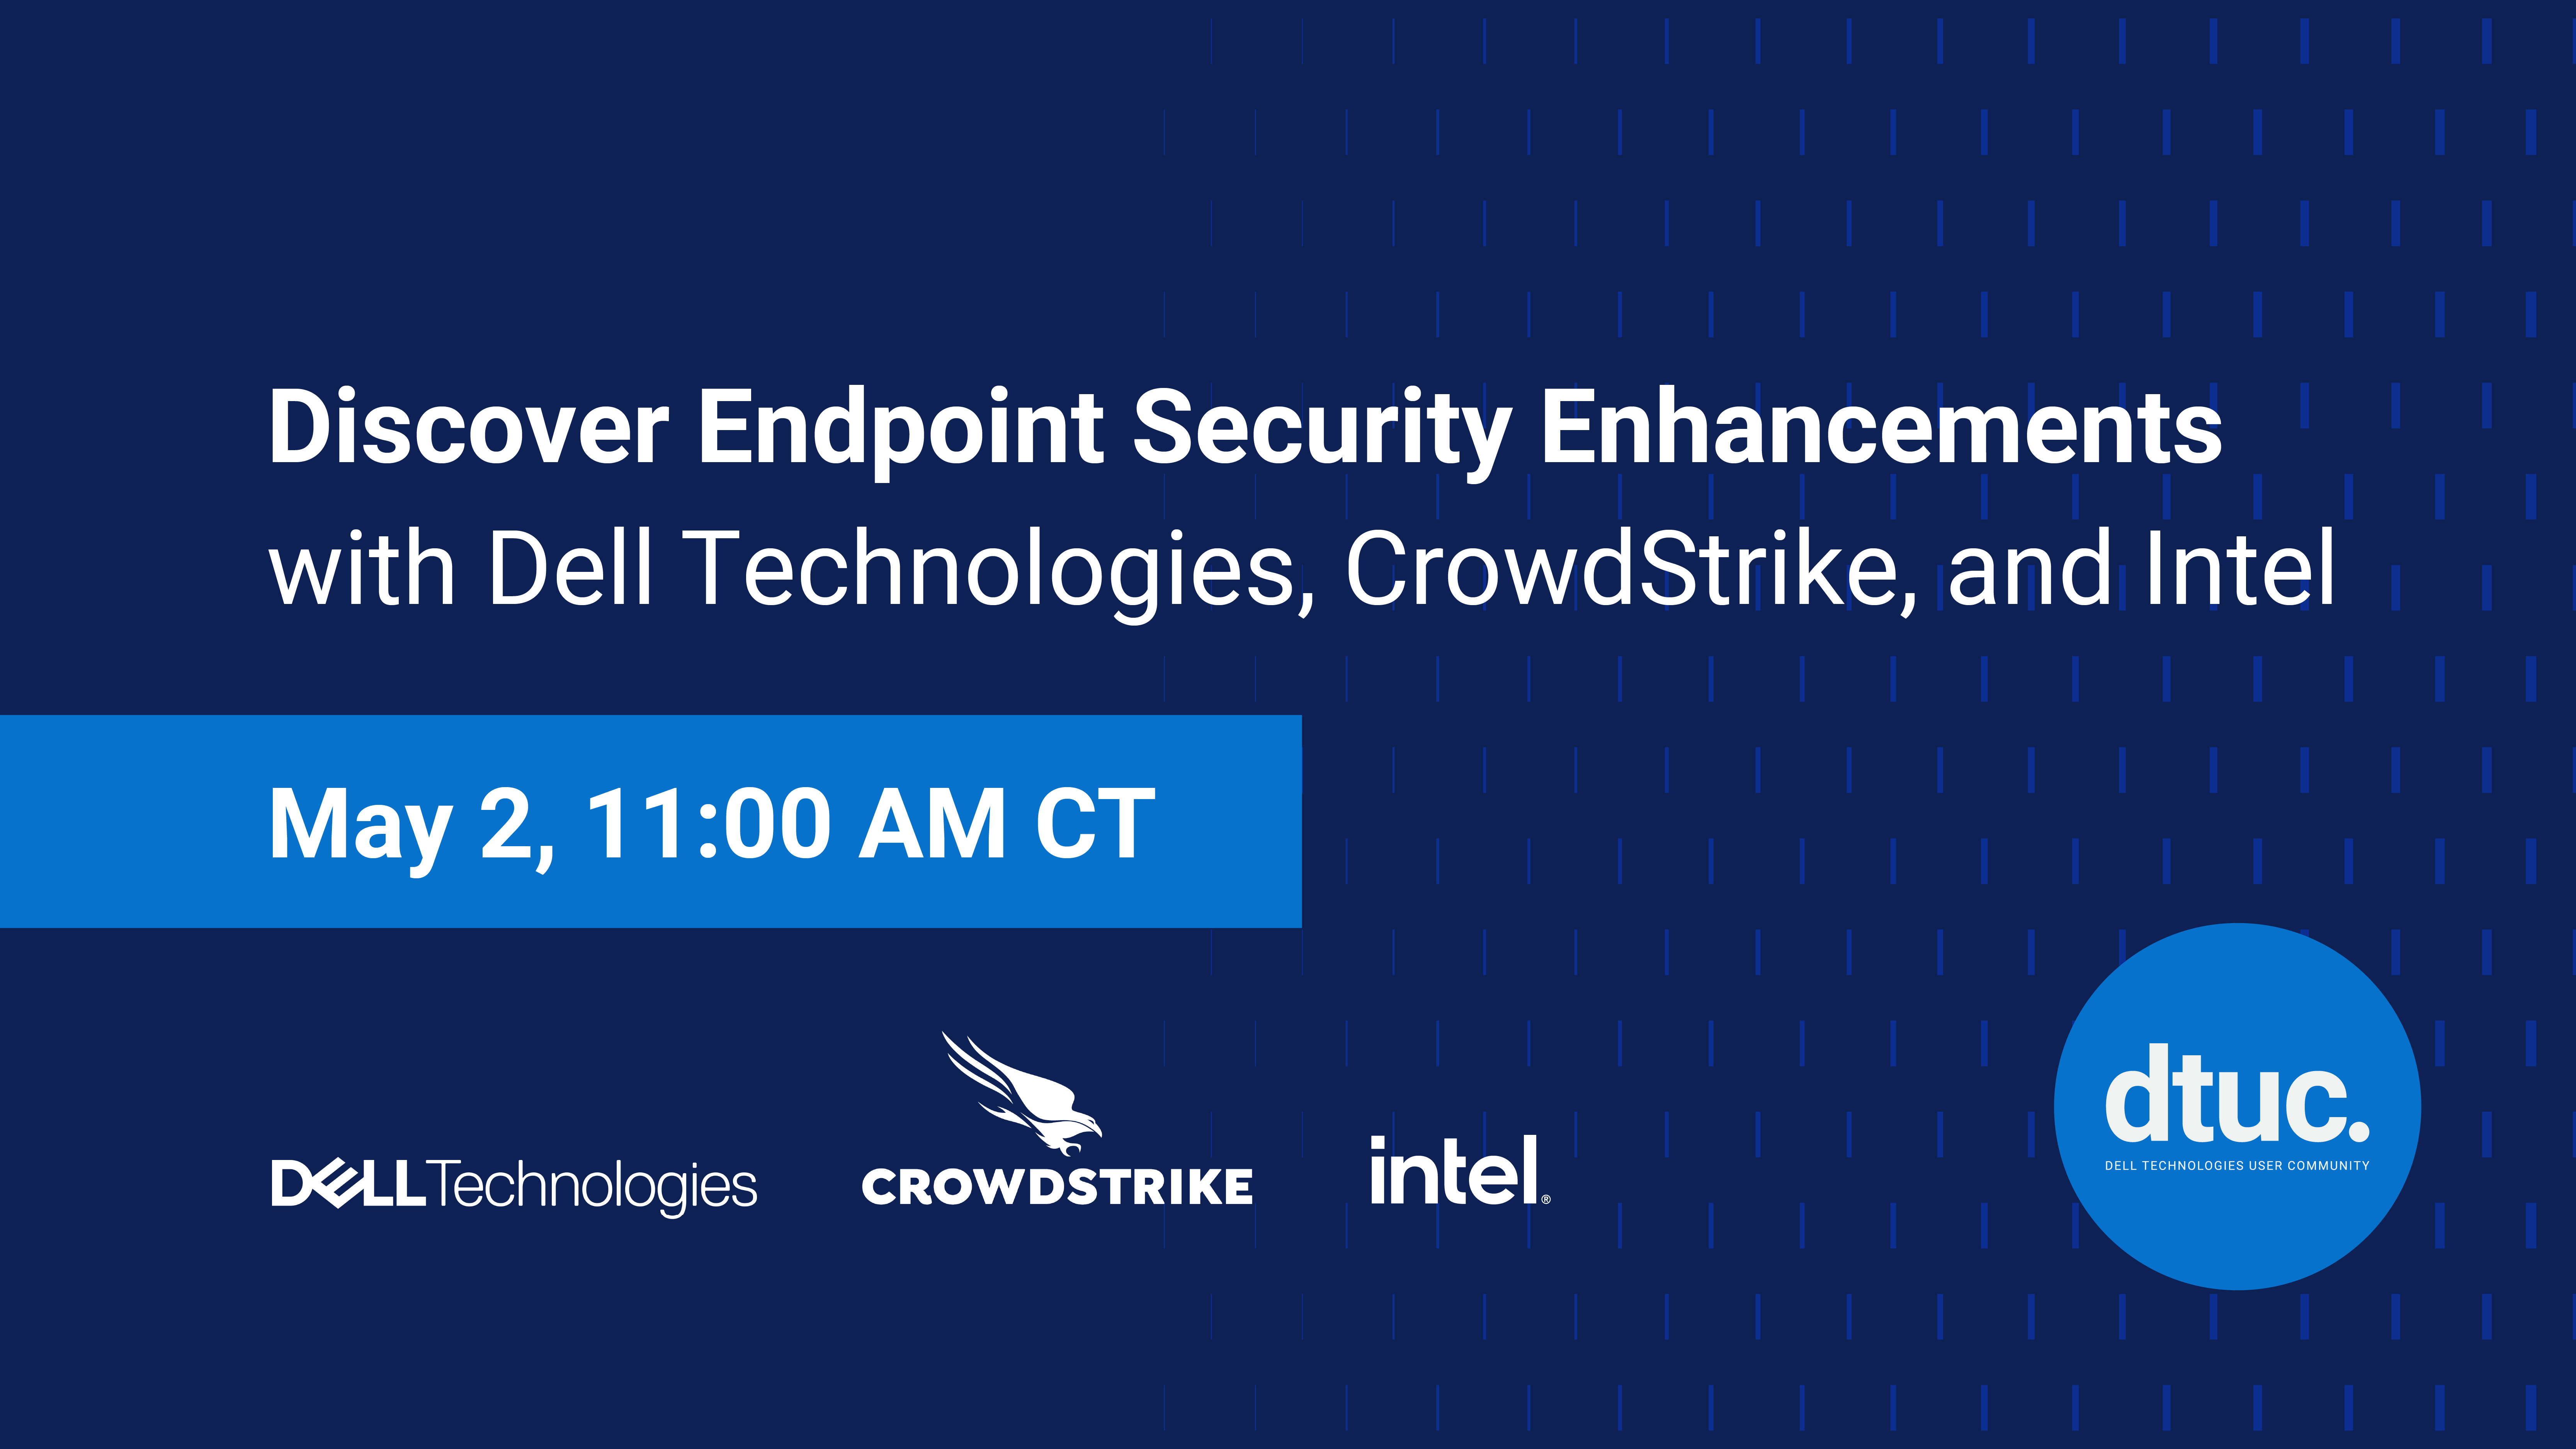 Discover Endpoint Security Enhancements with Dell Technologies, CrowdStrike, and Intel Webinar